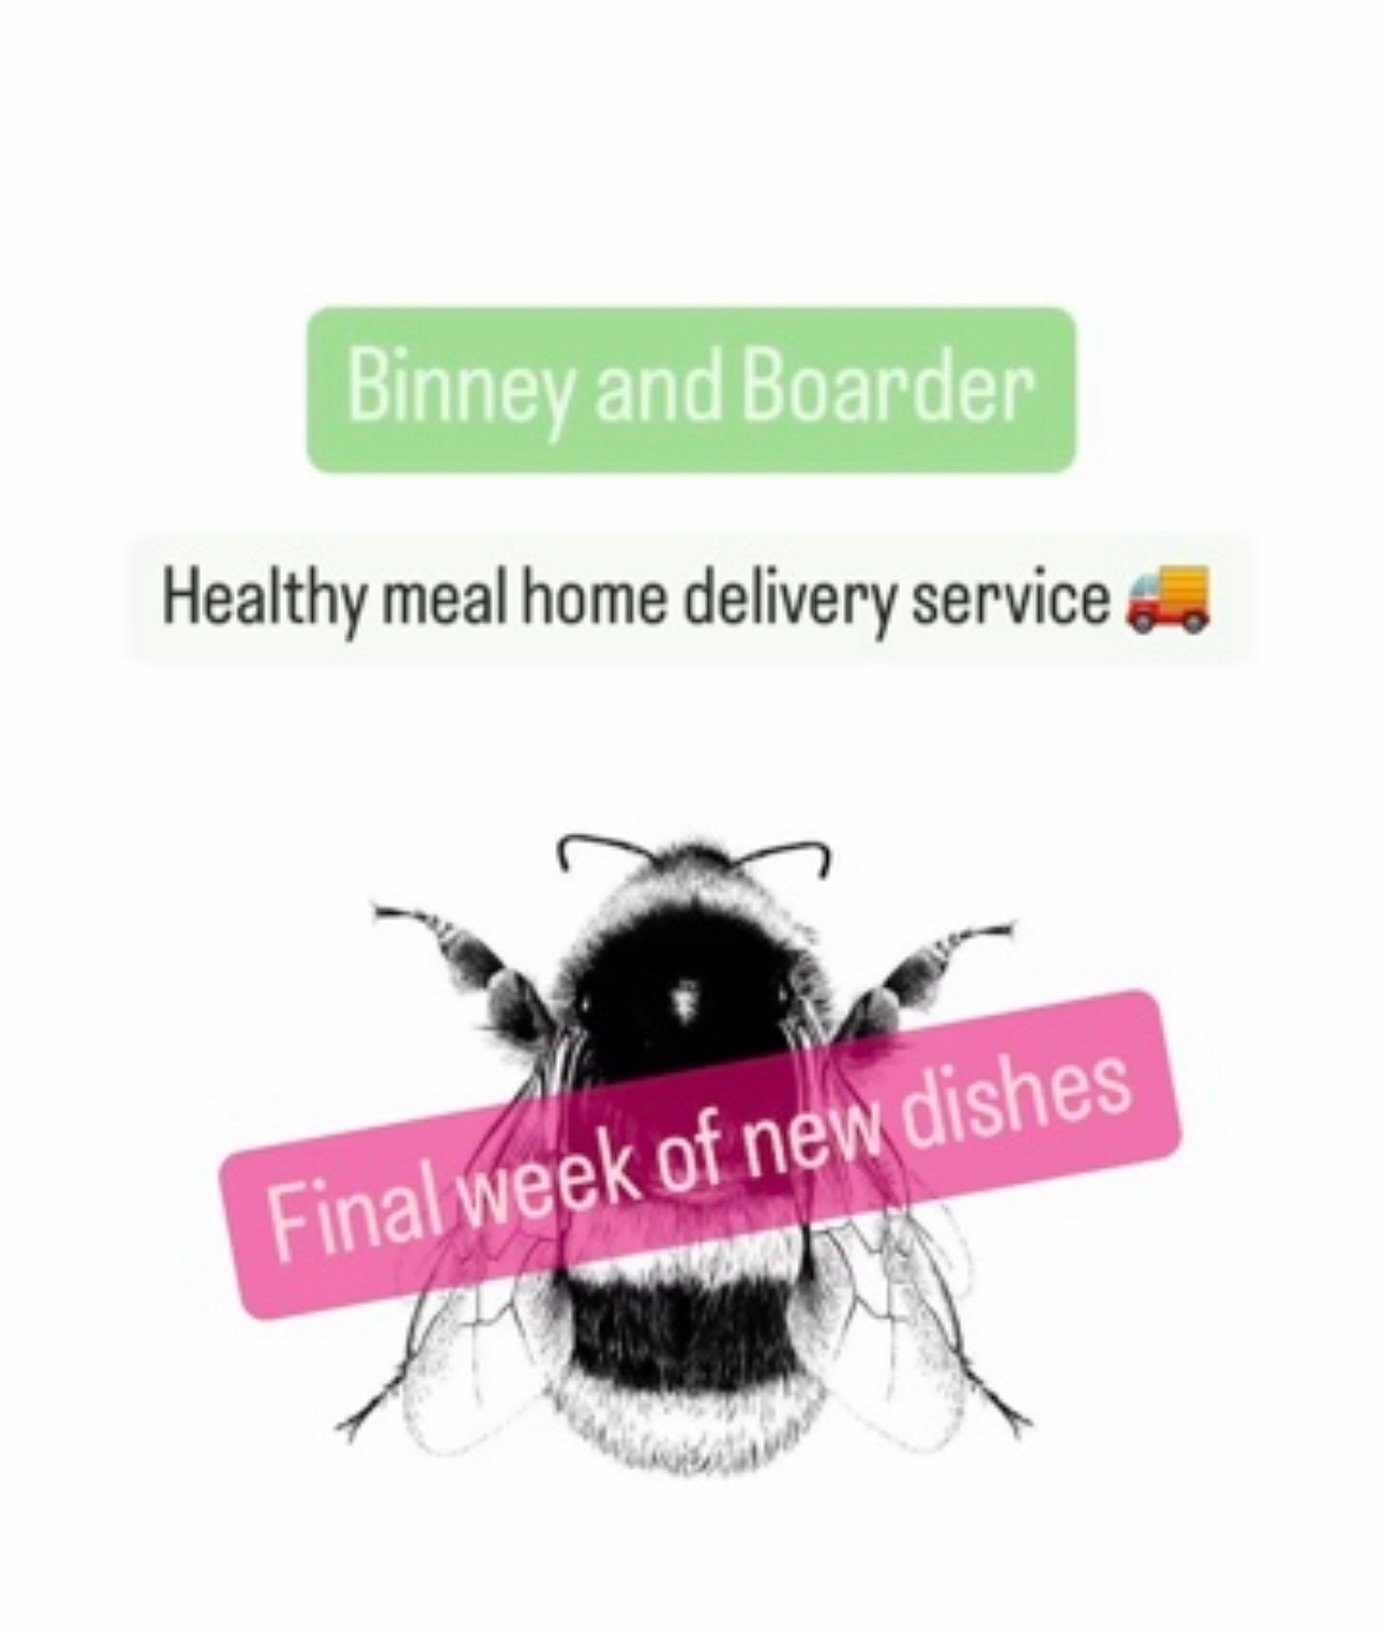 ⭐️ Final week of BINNEY and BOARDER healthy meal home delivery opportunity ⭐️

🚚 🥦 🧄 🧅

Next week the beautiful food company BINNEY and BOARDER will be supporting my DIGESTIVE WELLNESS course with healthy homemade dishes delivered to your door - 